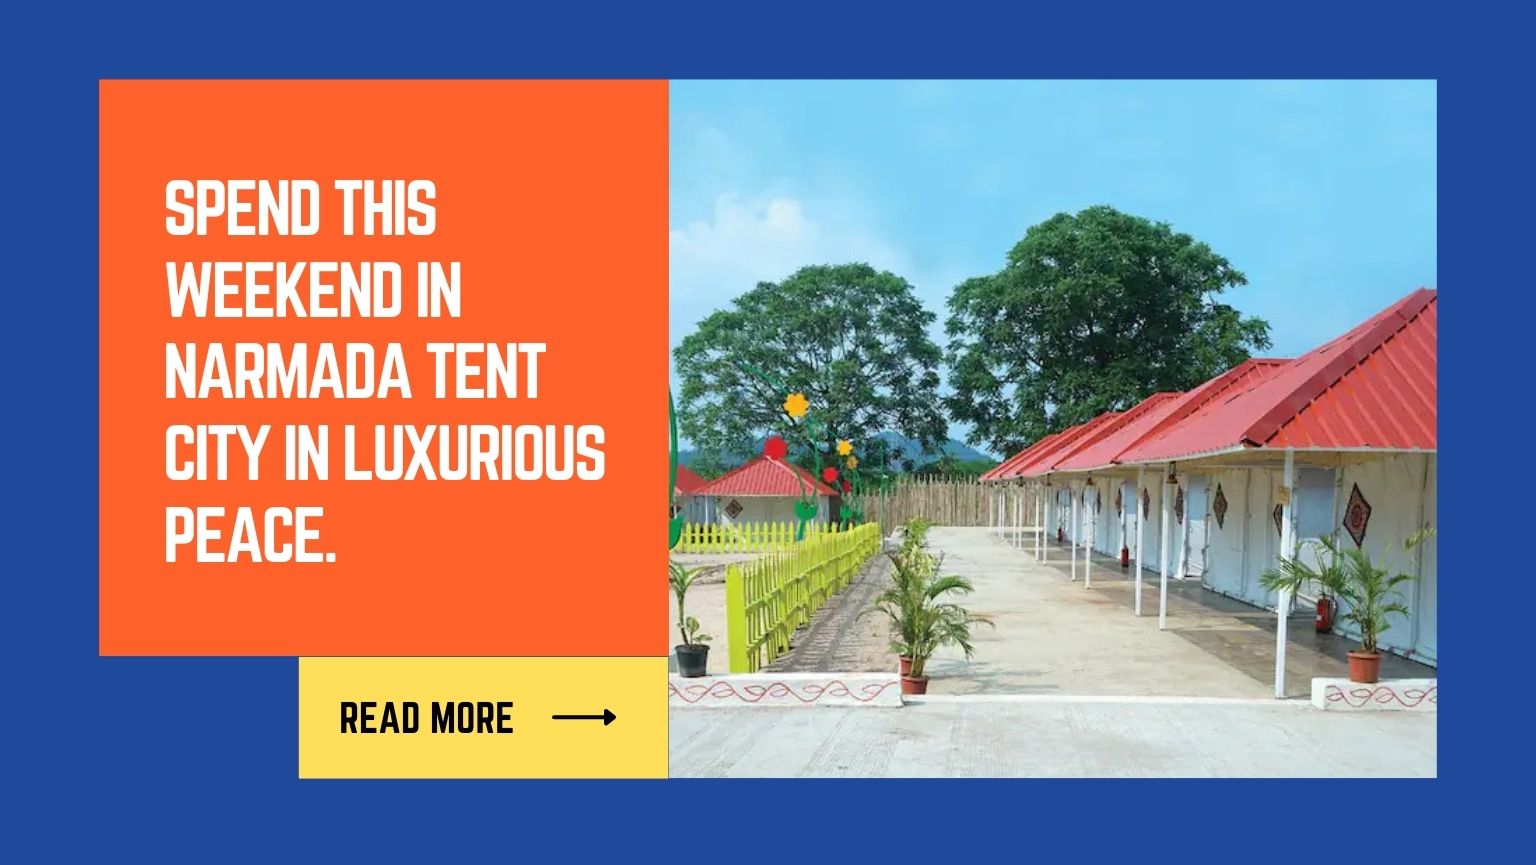 Spend this weekend in Narmada Tent City in luxurious peace.